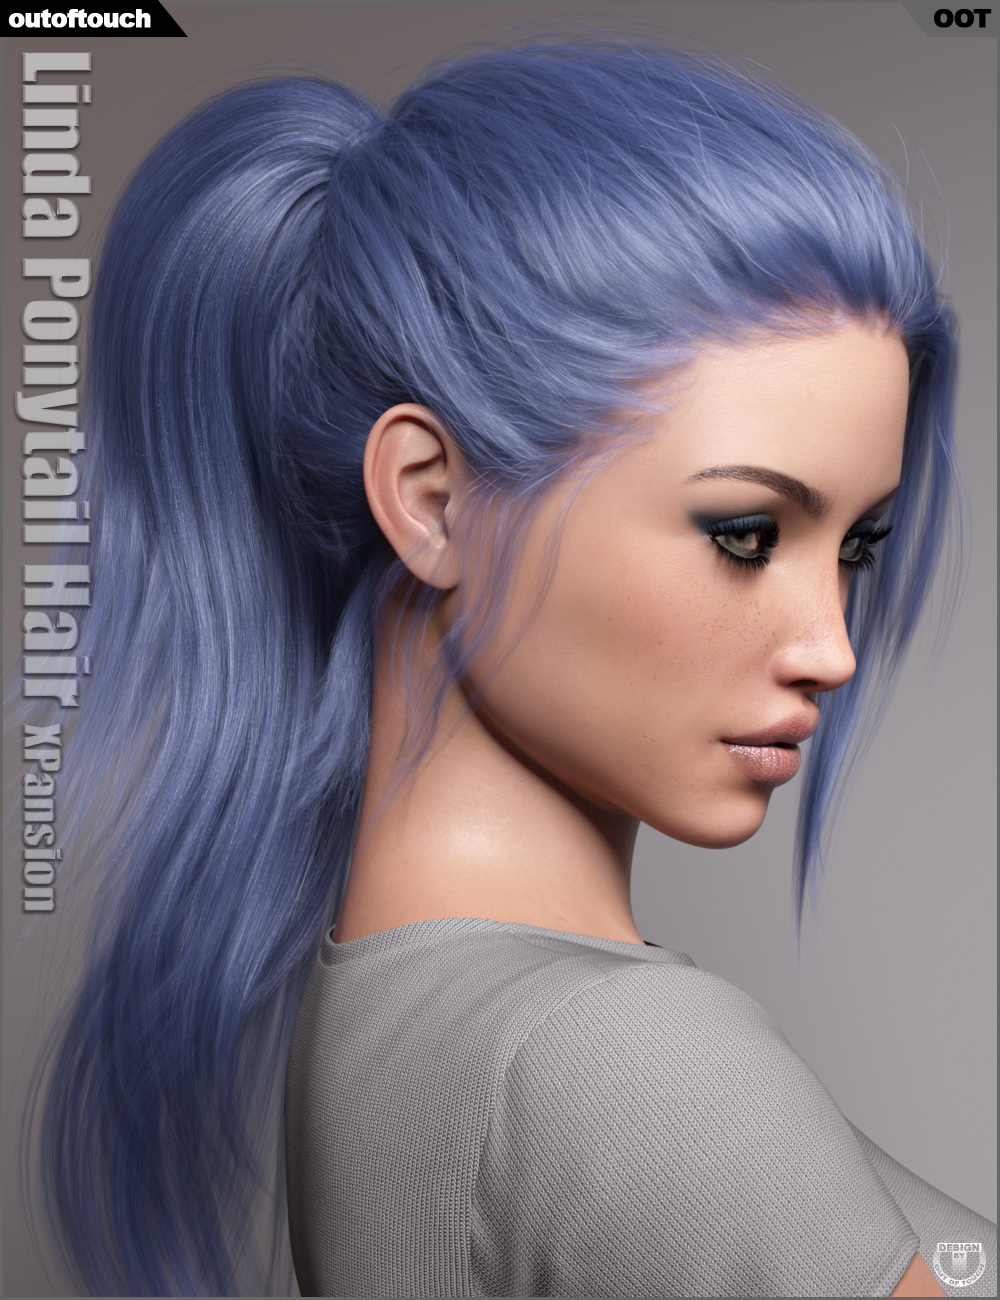 OOT Hairblending 2.0 Texture XPansion for Linda Ponytail Hair by: outoftouch, 3D Models by Daz 3D